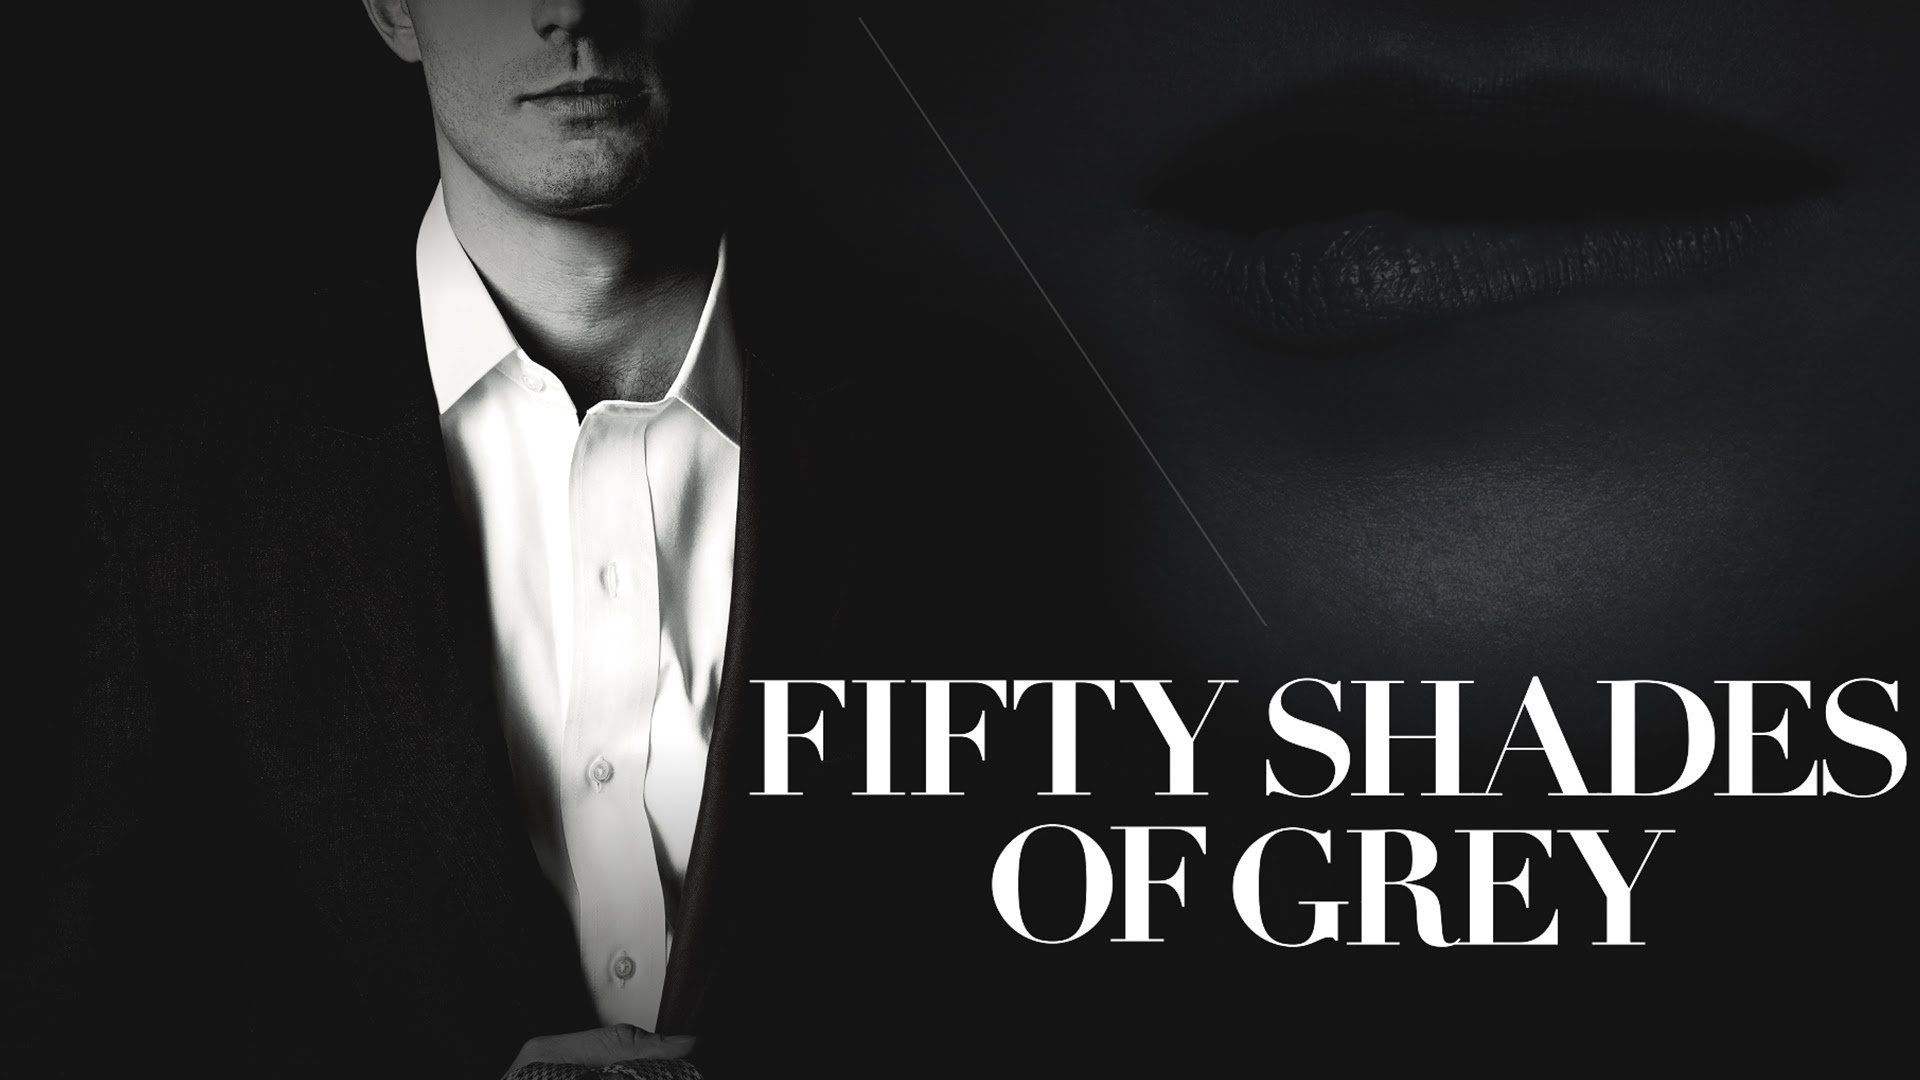 Review: 50 Shades of Gray